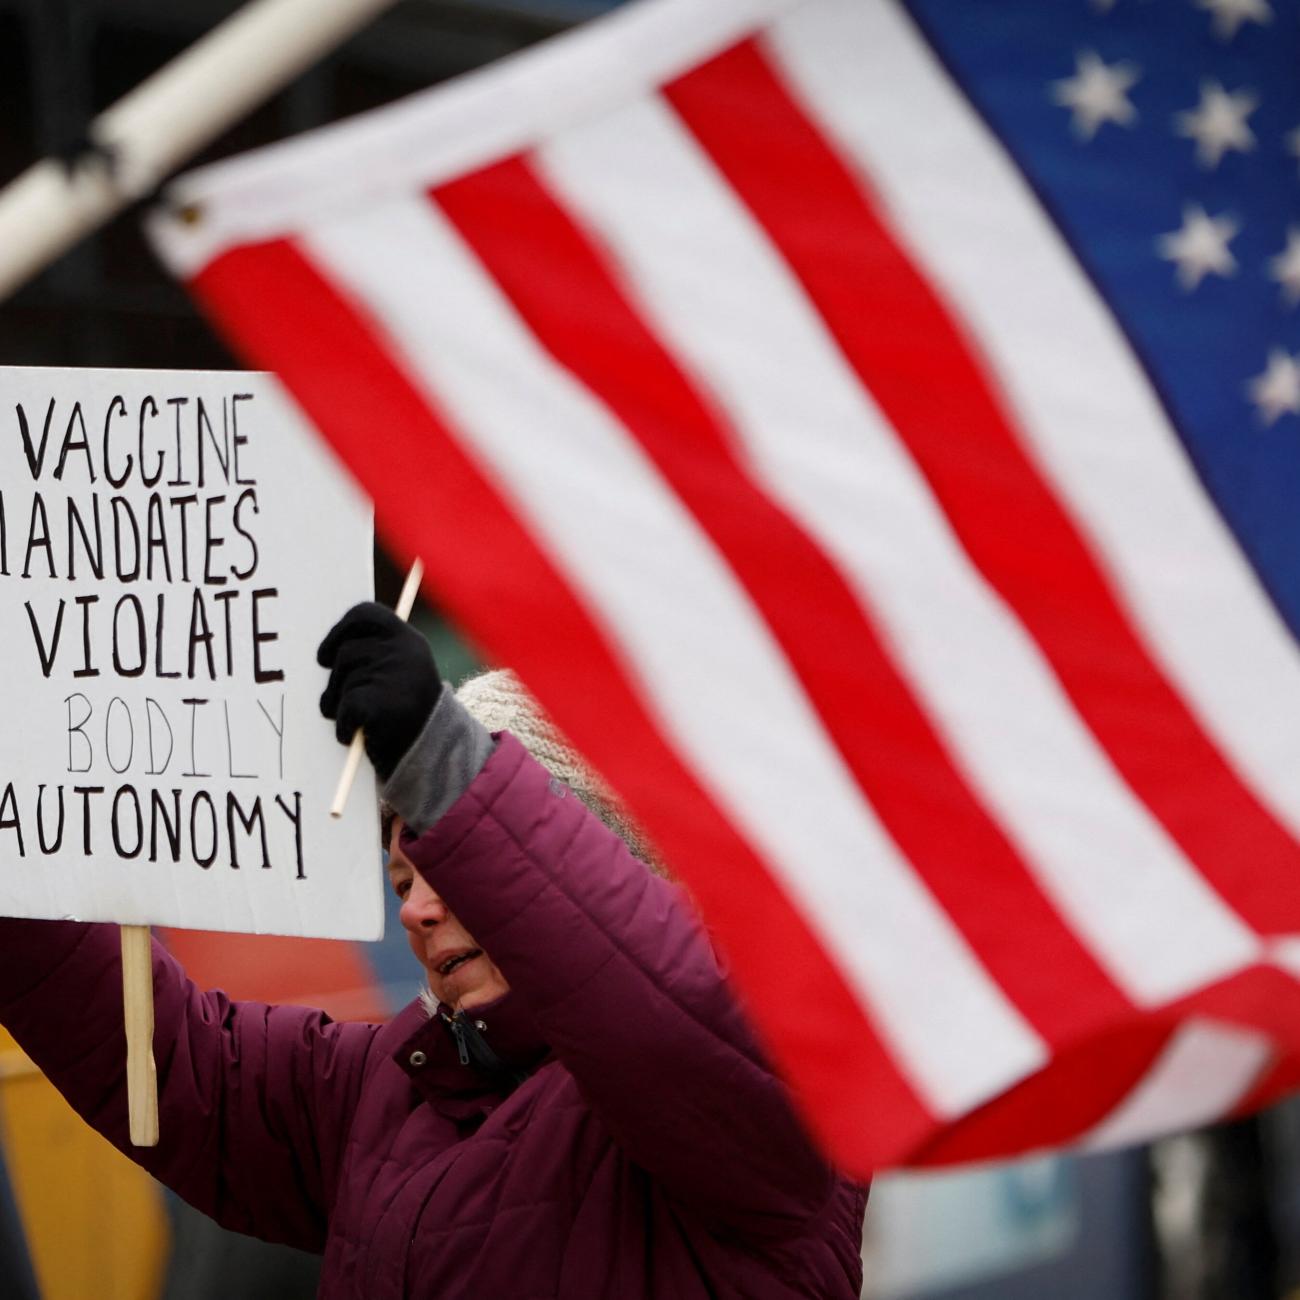 A protester holds a banner at a rally against mandates for the vaccines against the coronavirus disease (COVID-19) outside the New York State Capitol in Albany, New York.